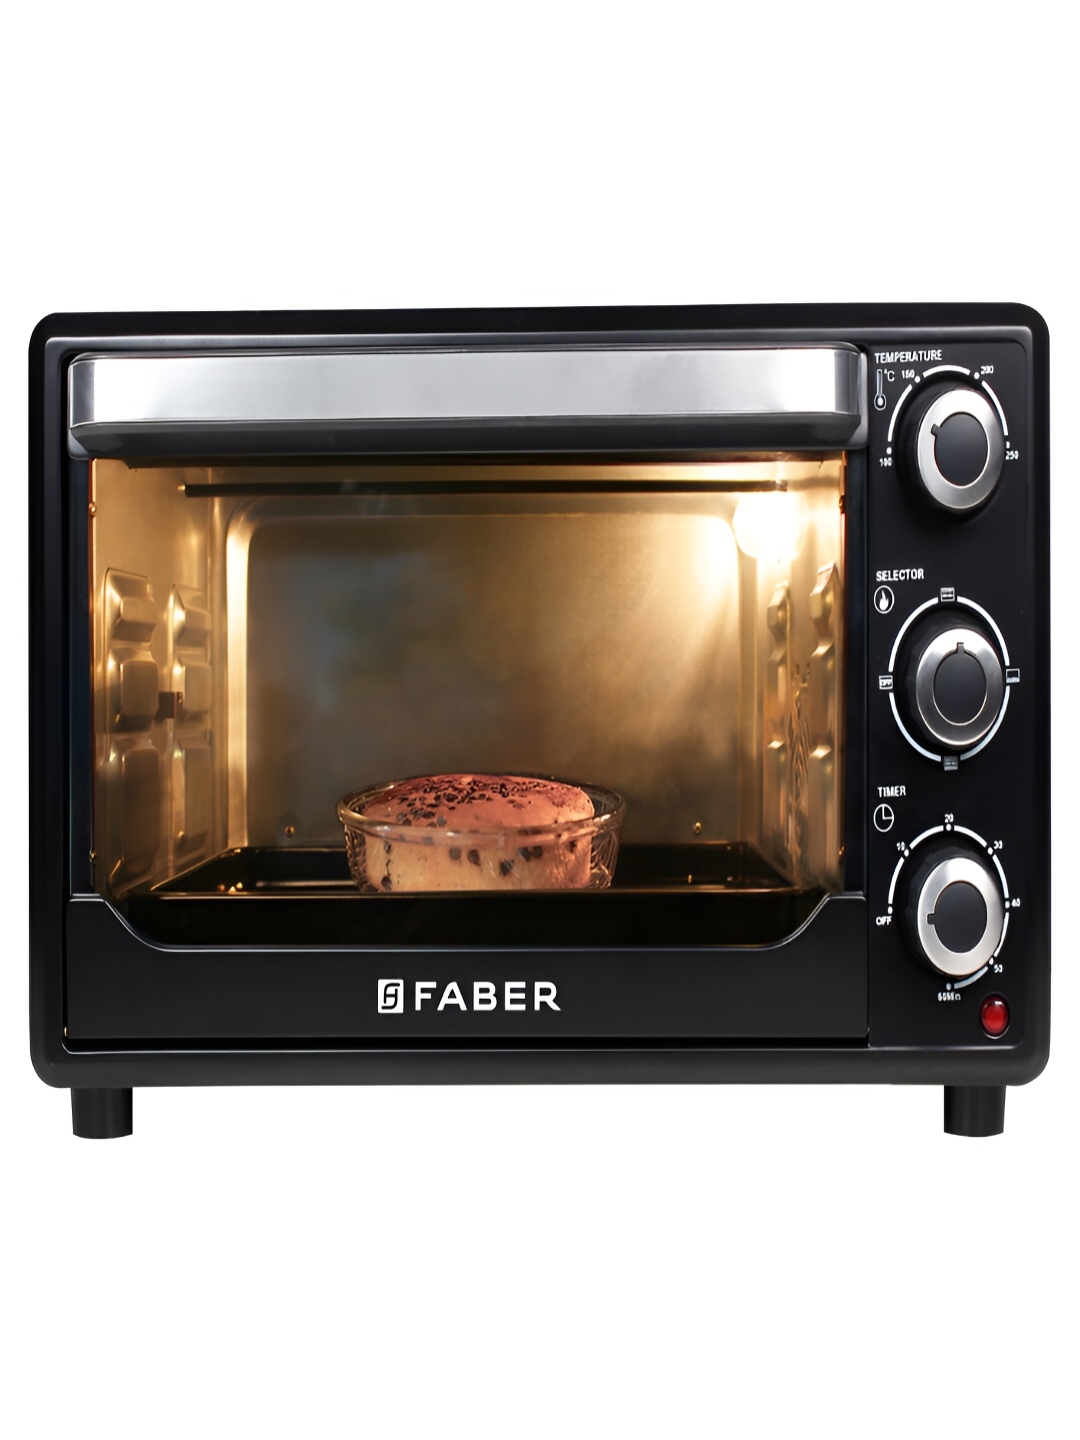 

FABER Black Oven Toaster & Grill With Rotisserie 24 L